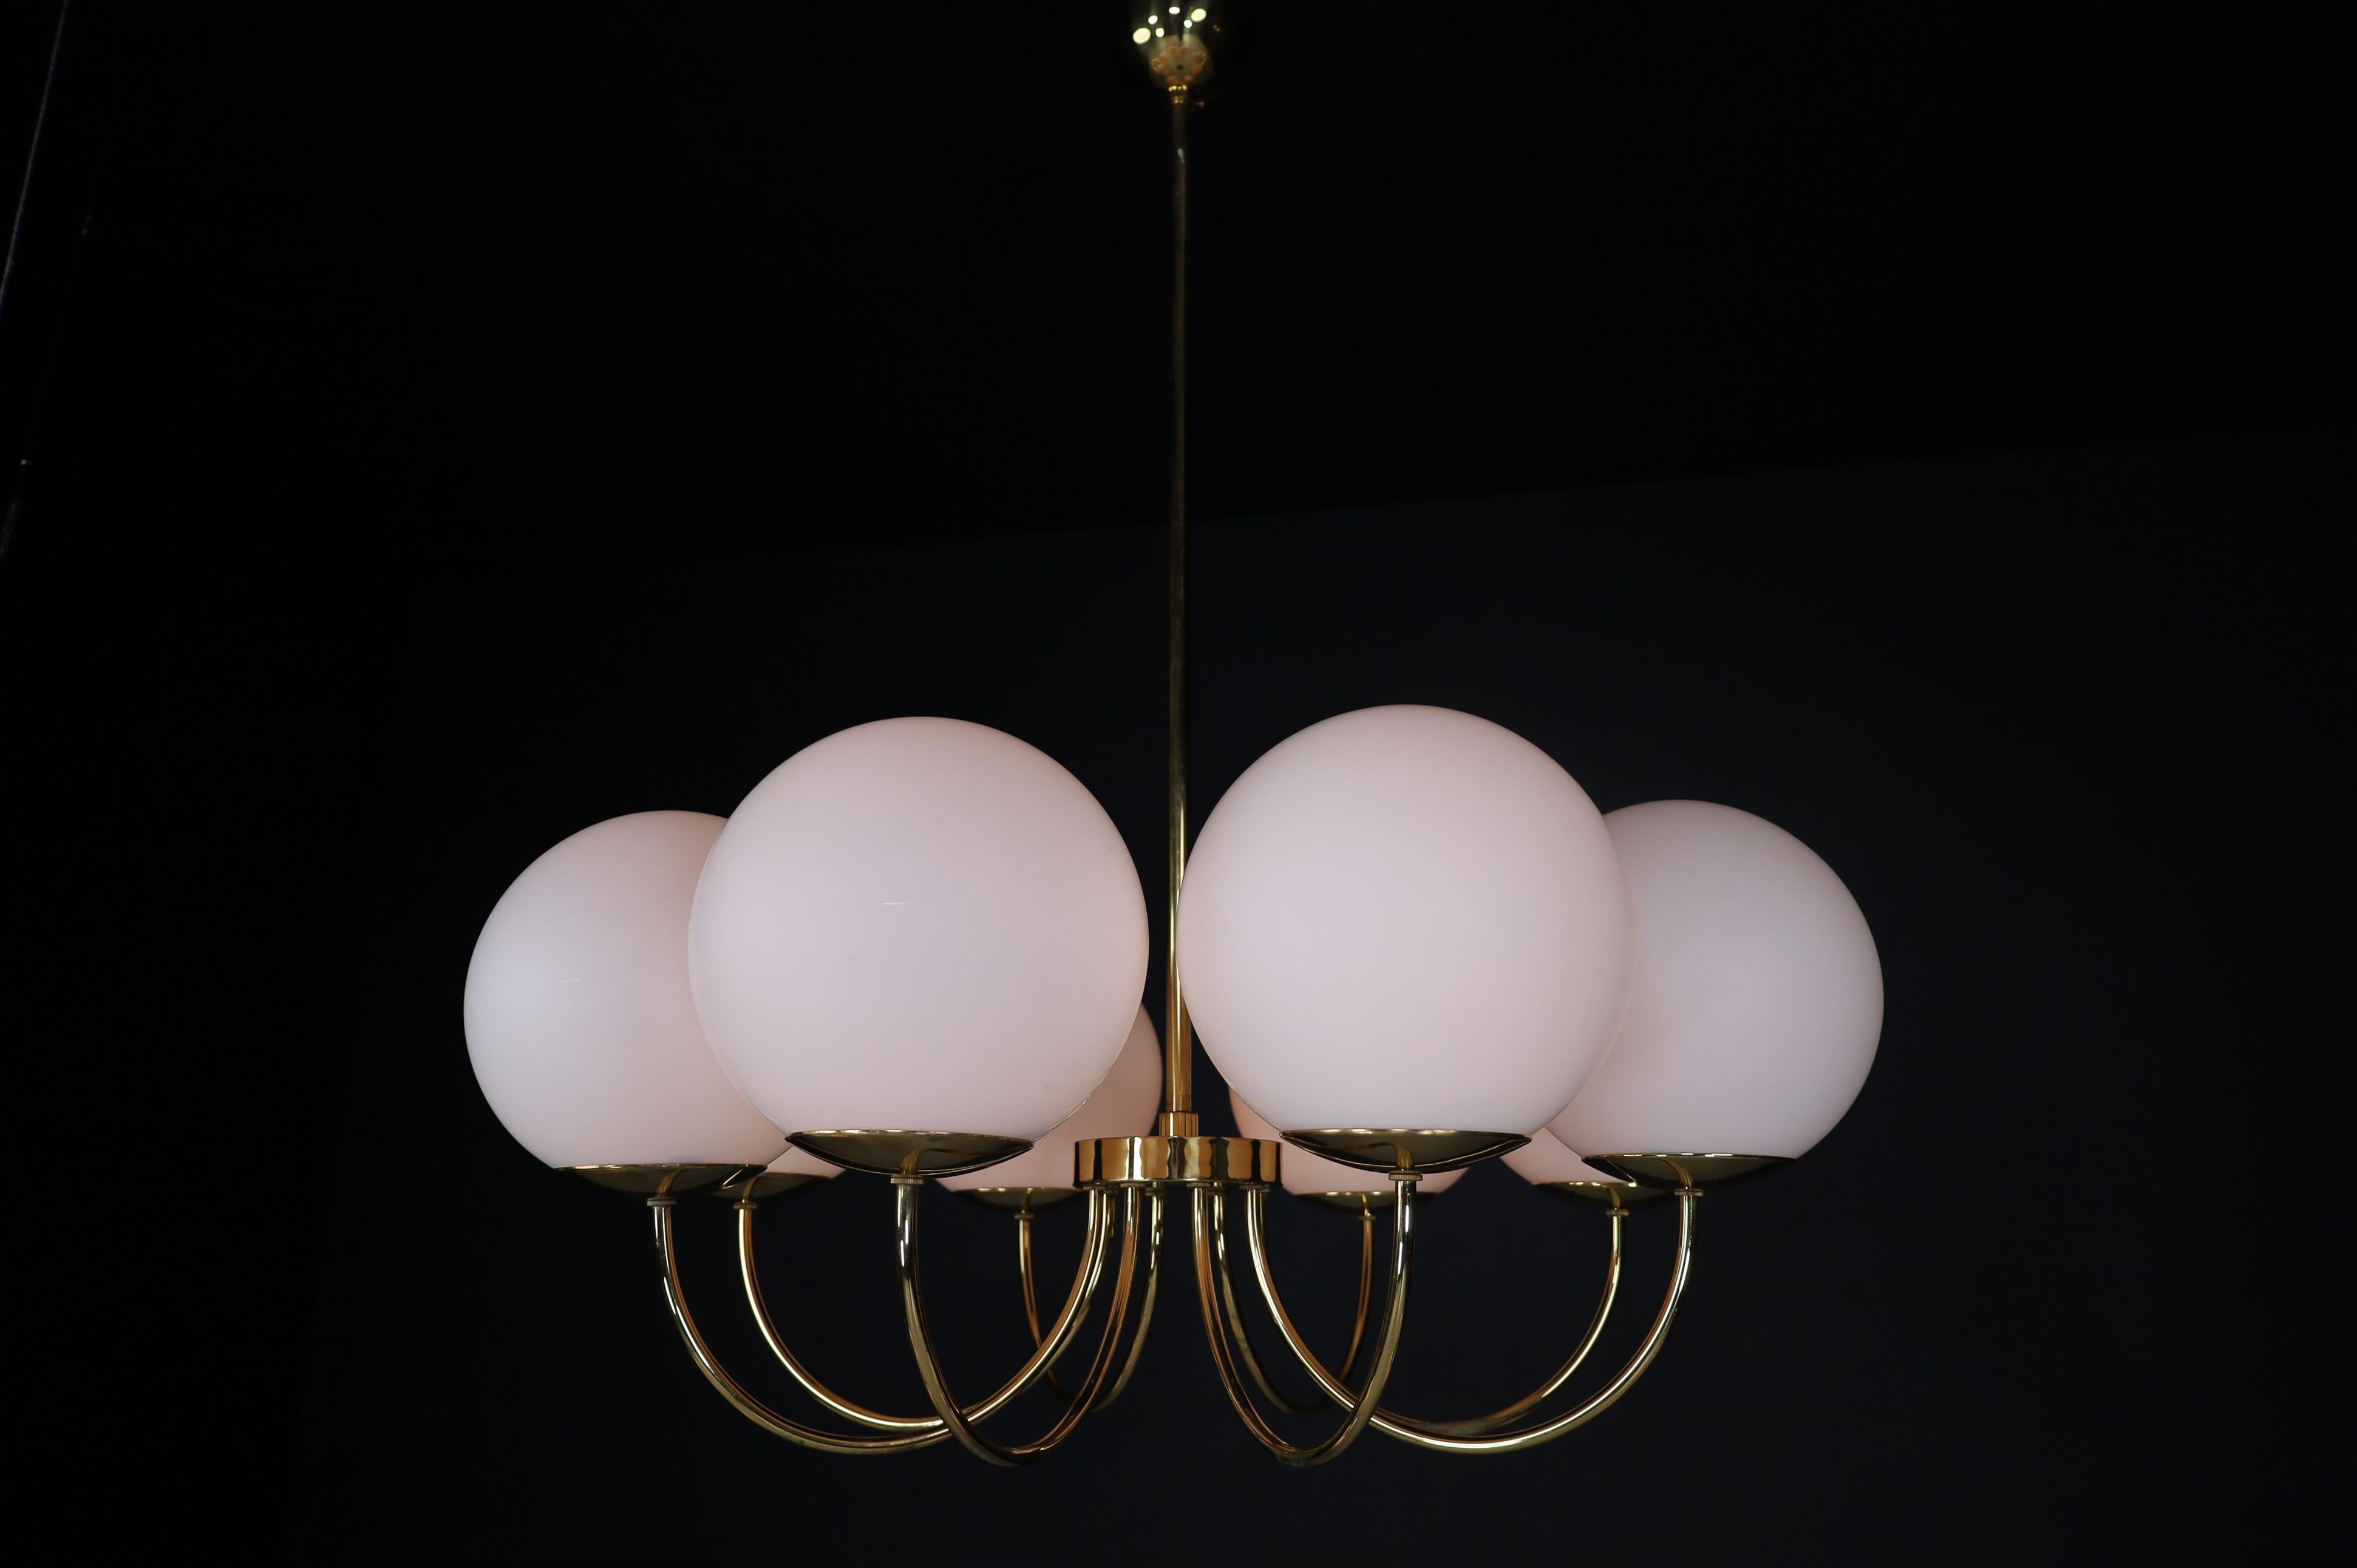 1 of 3 Elegant Chandeliers with Brass Fixture and Opaline Glass Globes, 1960s For Sale 5